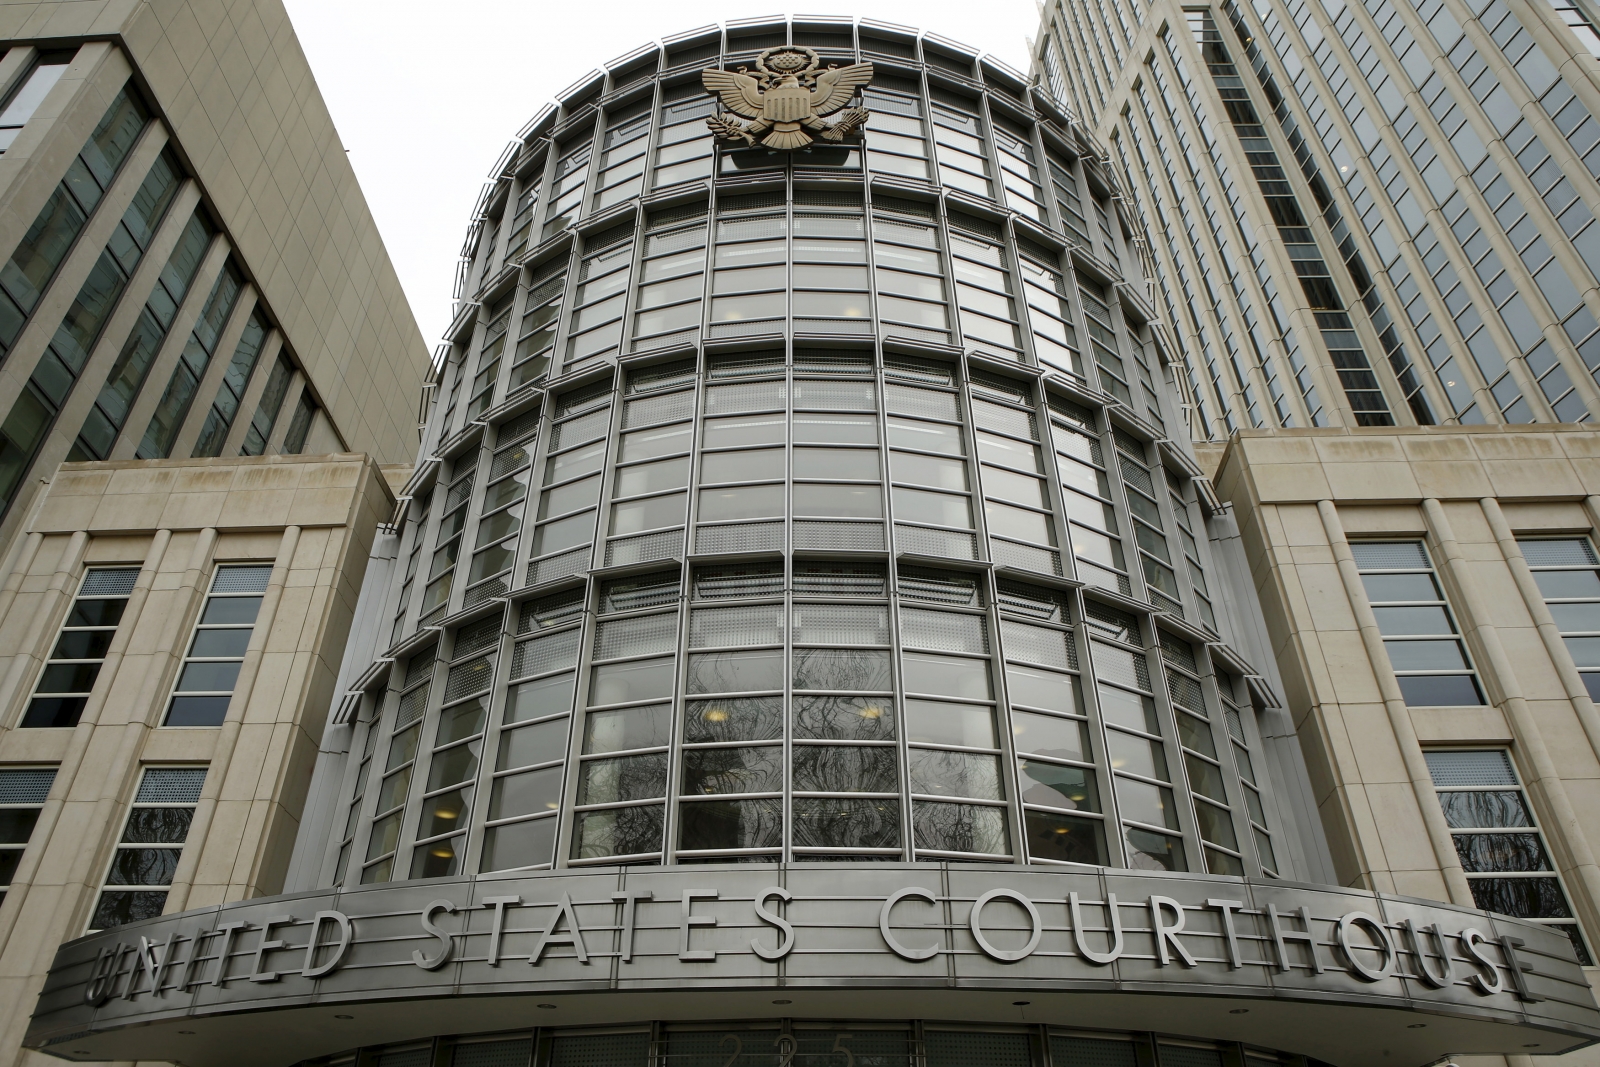 Three men plead guilty to US terrorism charges in Brooklyn Federal Court